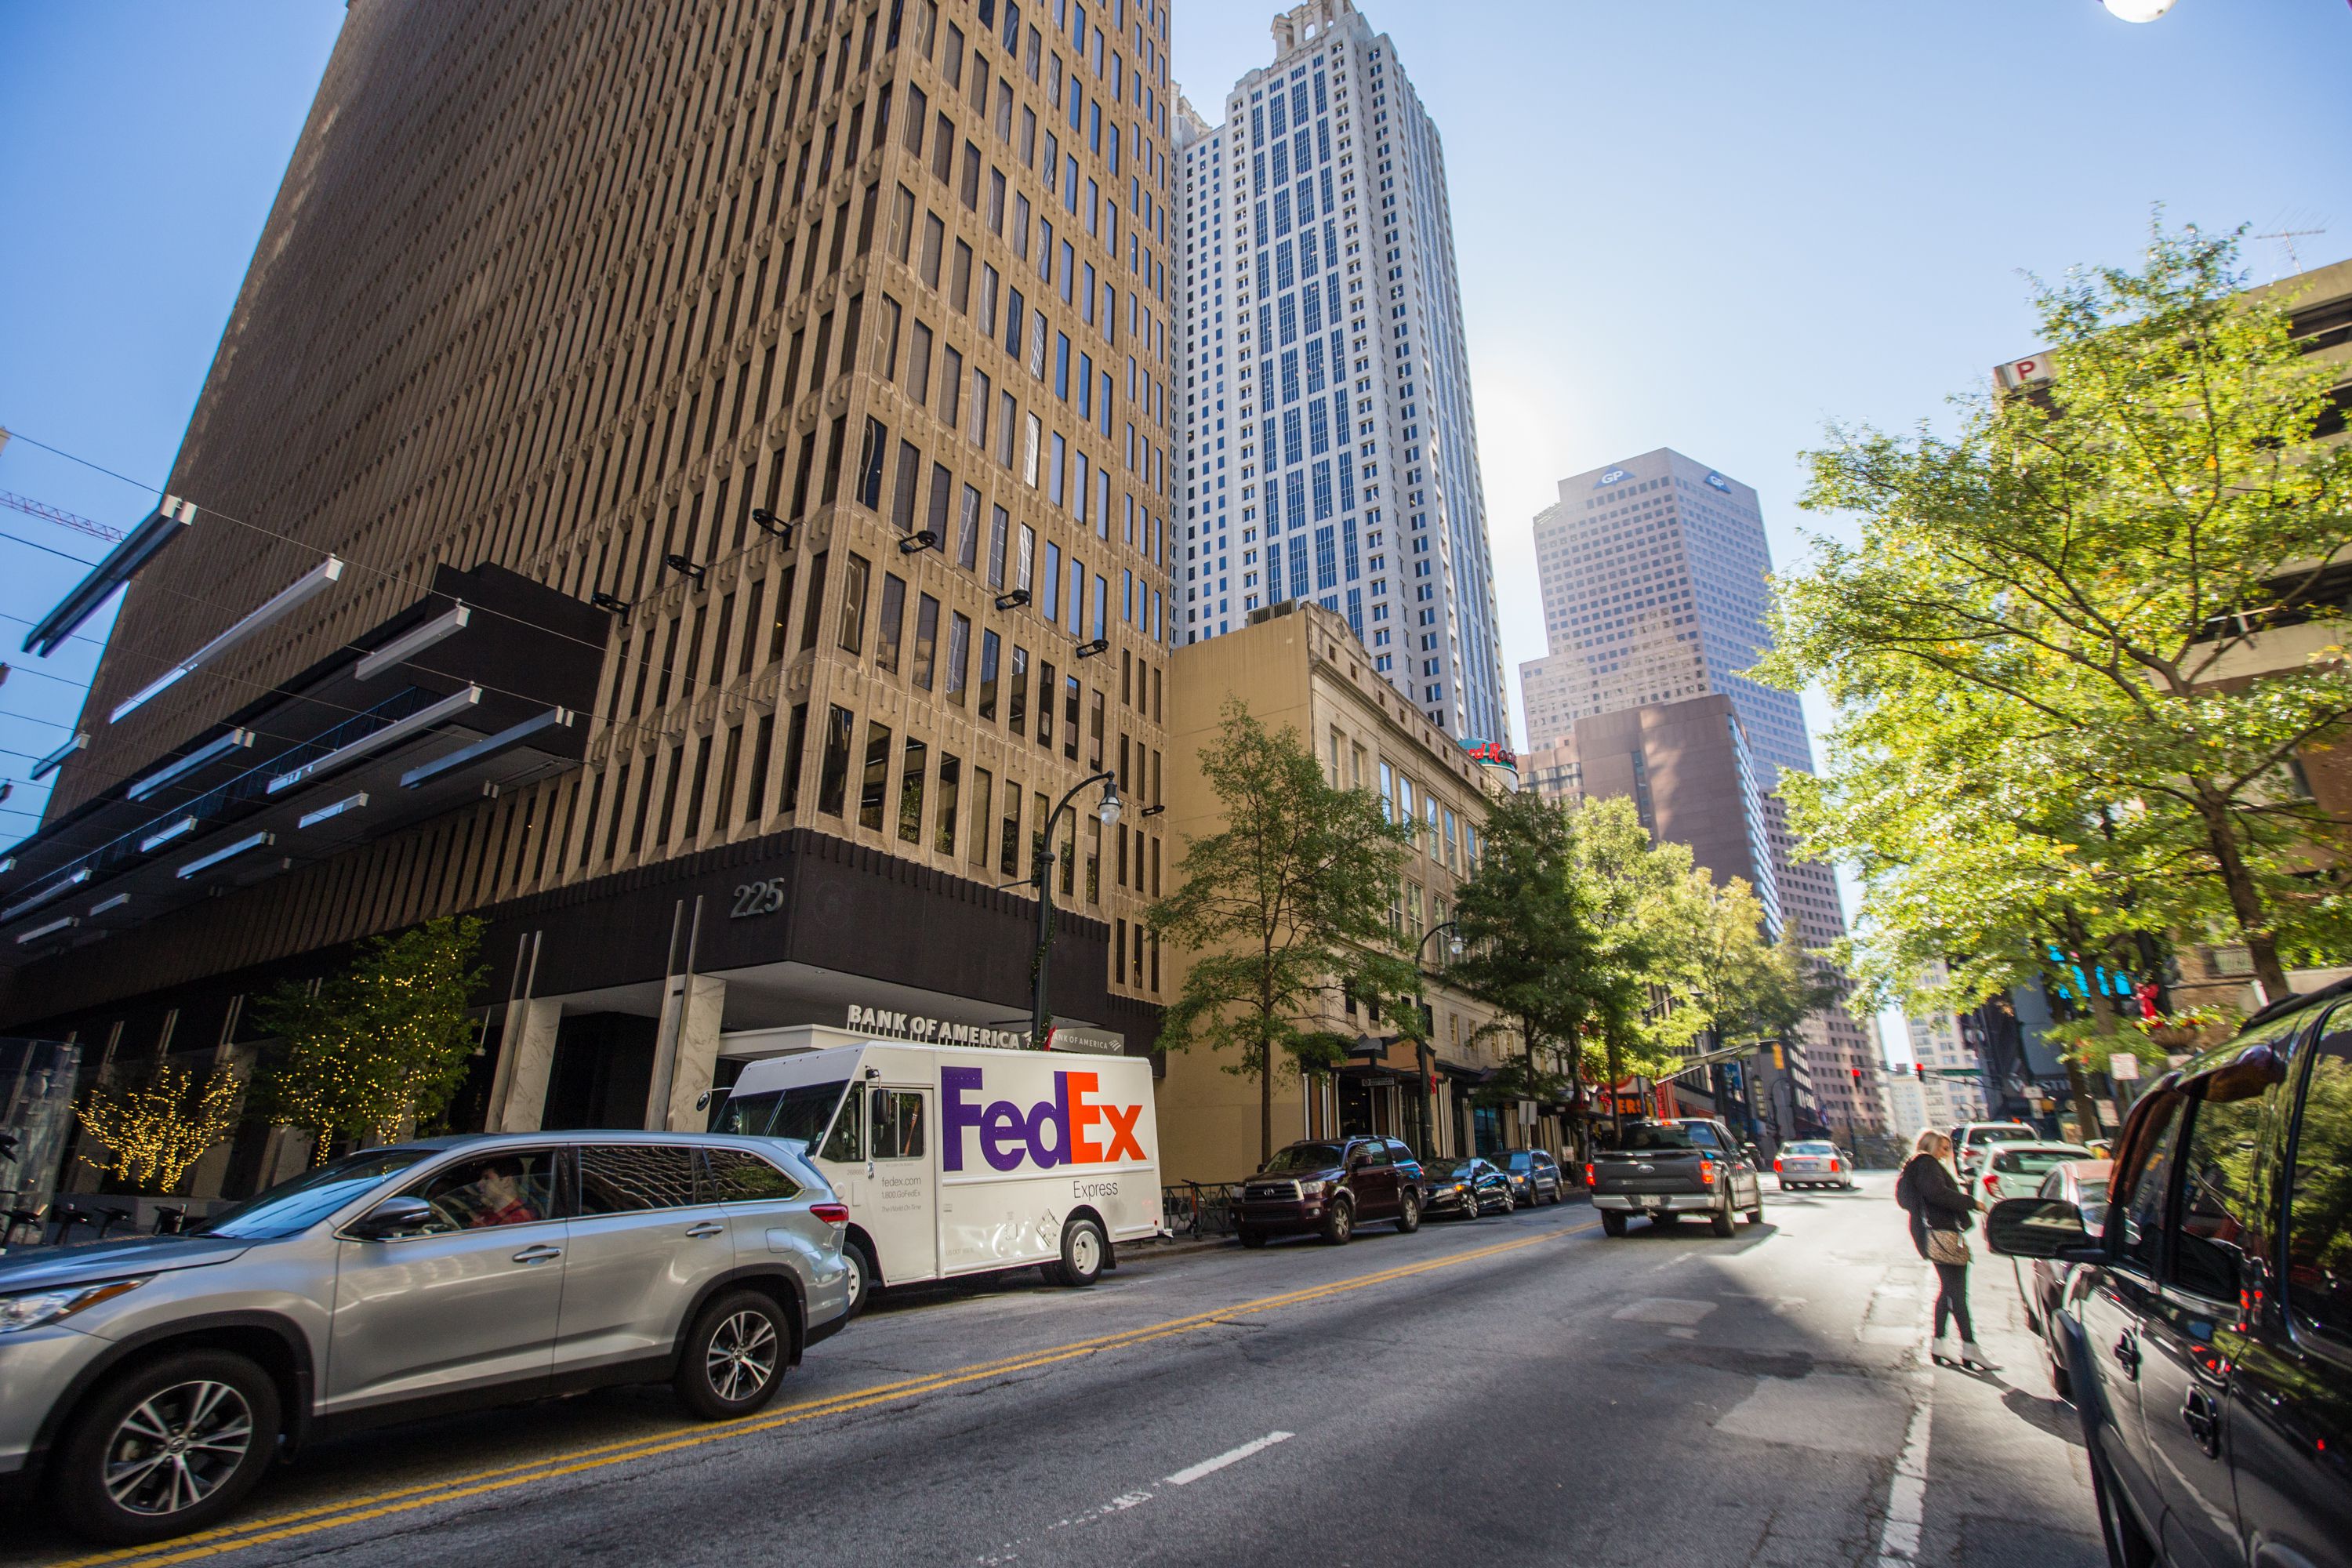 City plans to remove people-friendly project on Peachtree Street